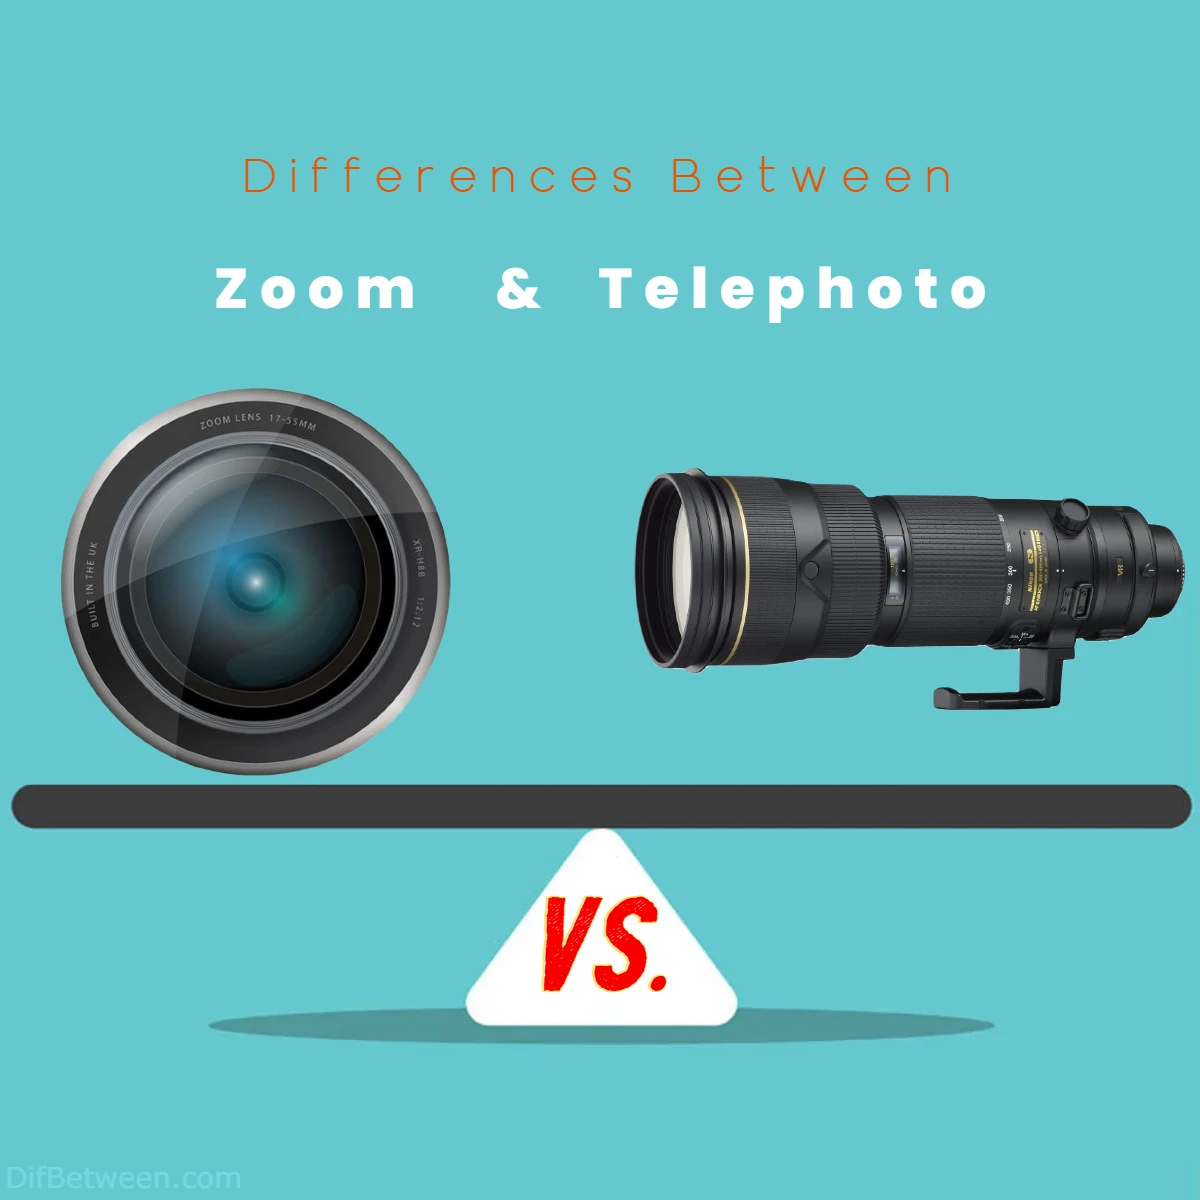 Differences Between Zoom vs Telephoto